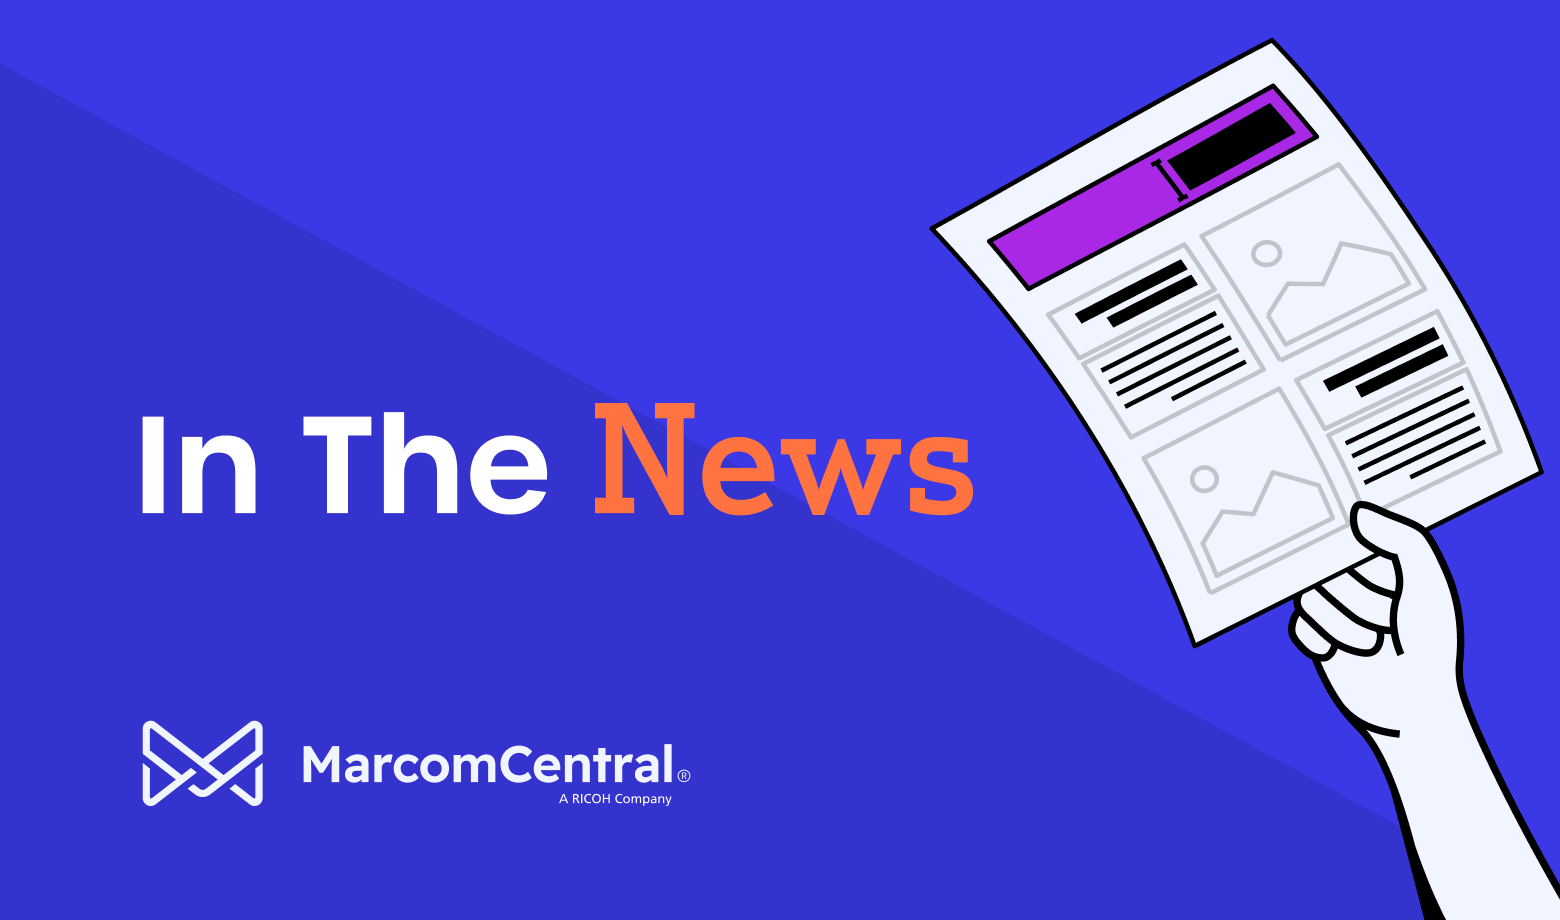 MarcomCentral Appoints New Vice President of Sales, Leonard DiMiceli, As DAM Provider Enters Next Phase of Growth and Innovation